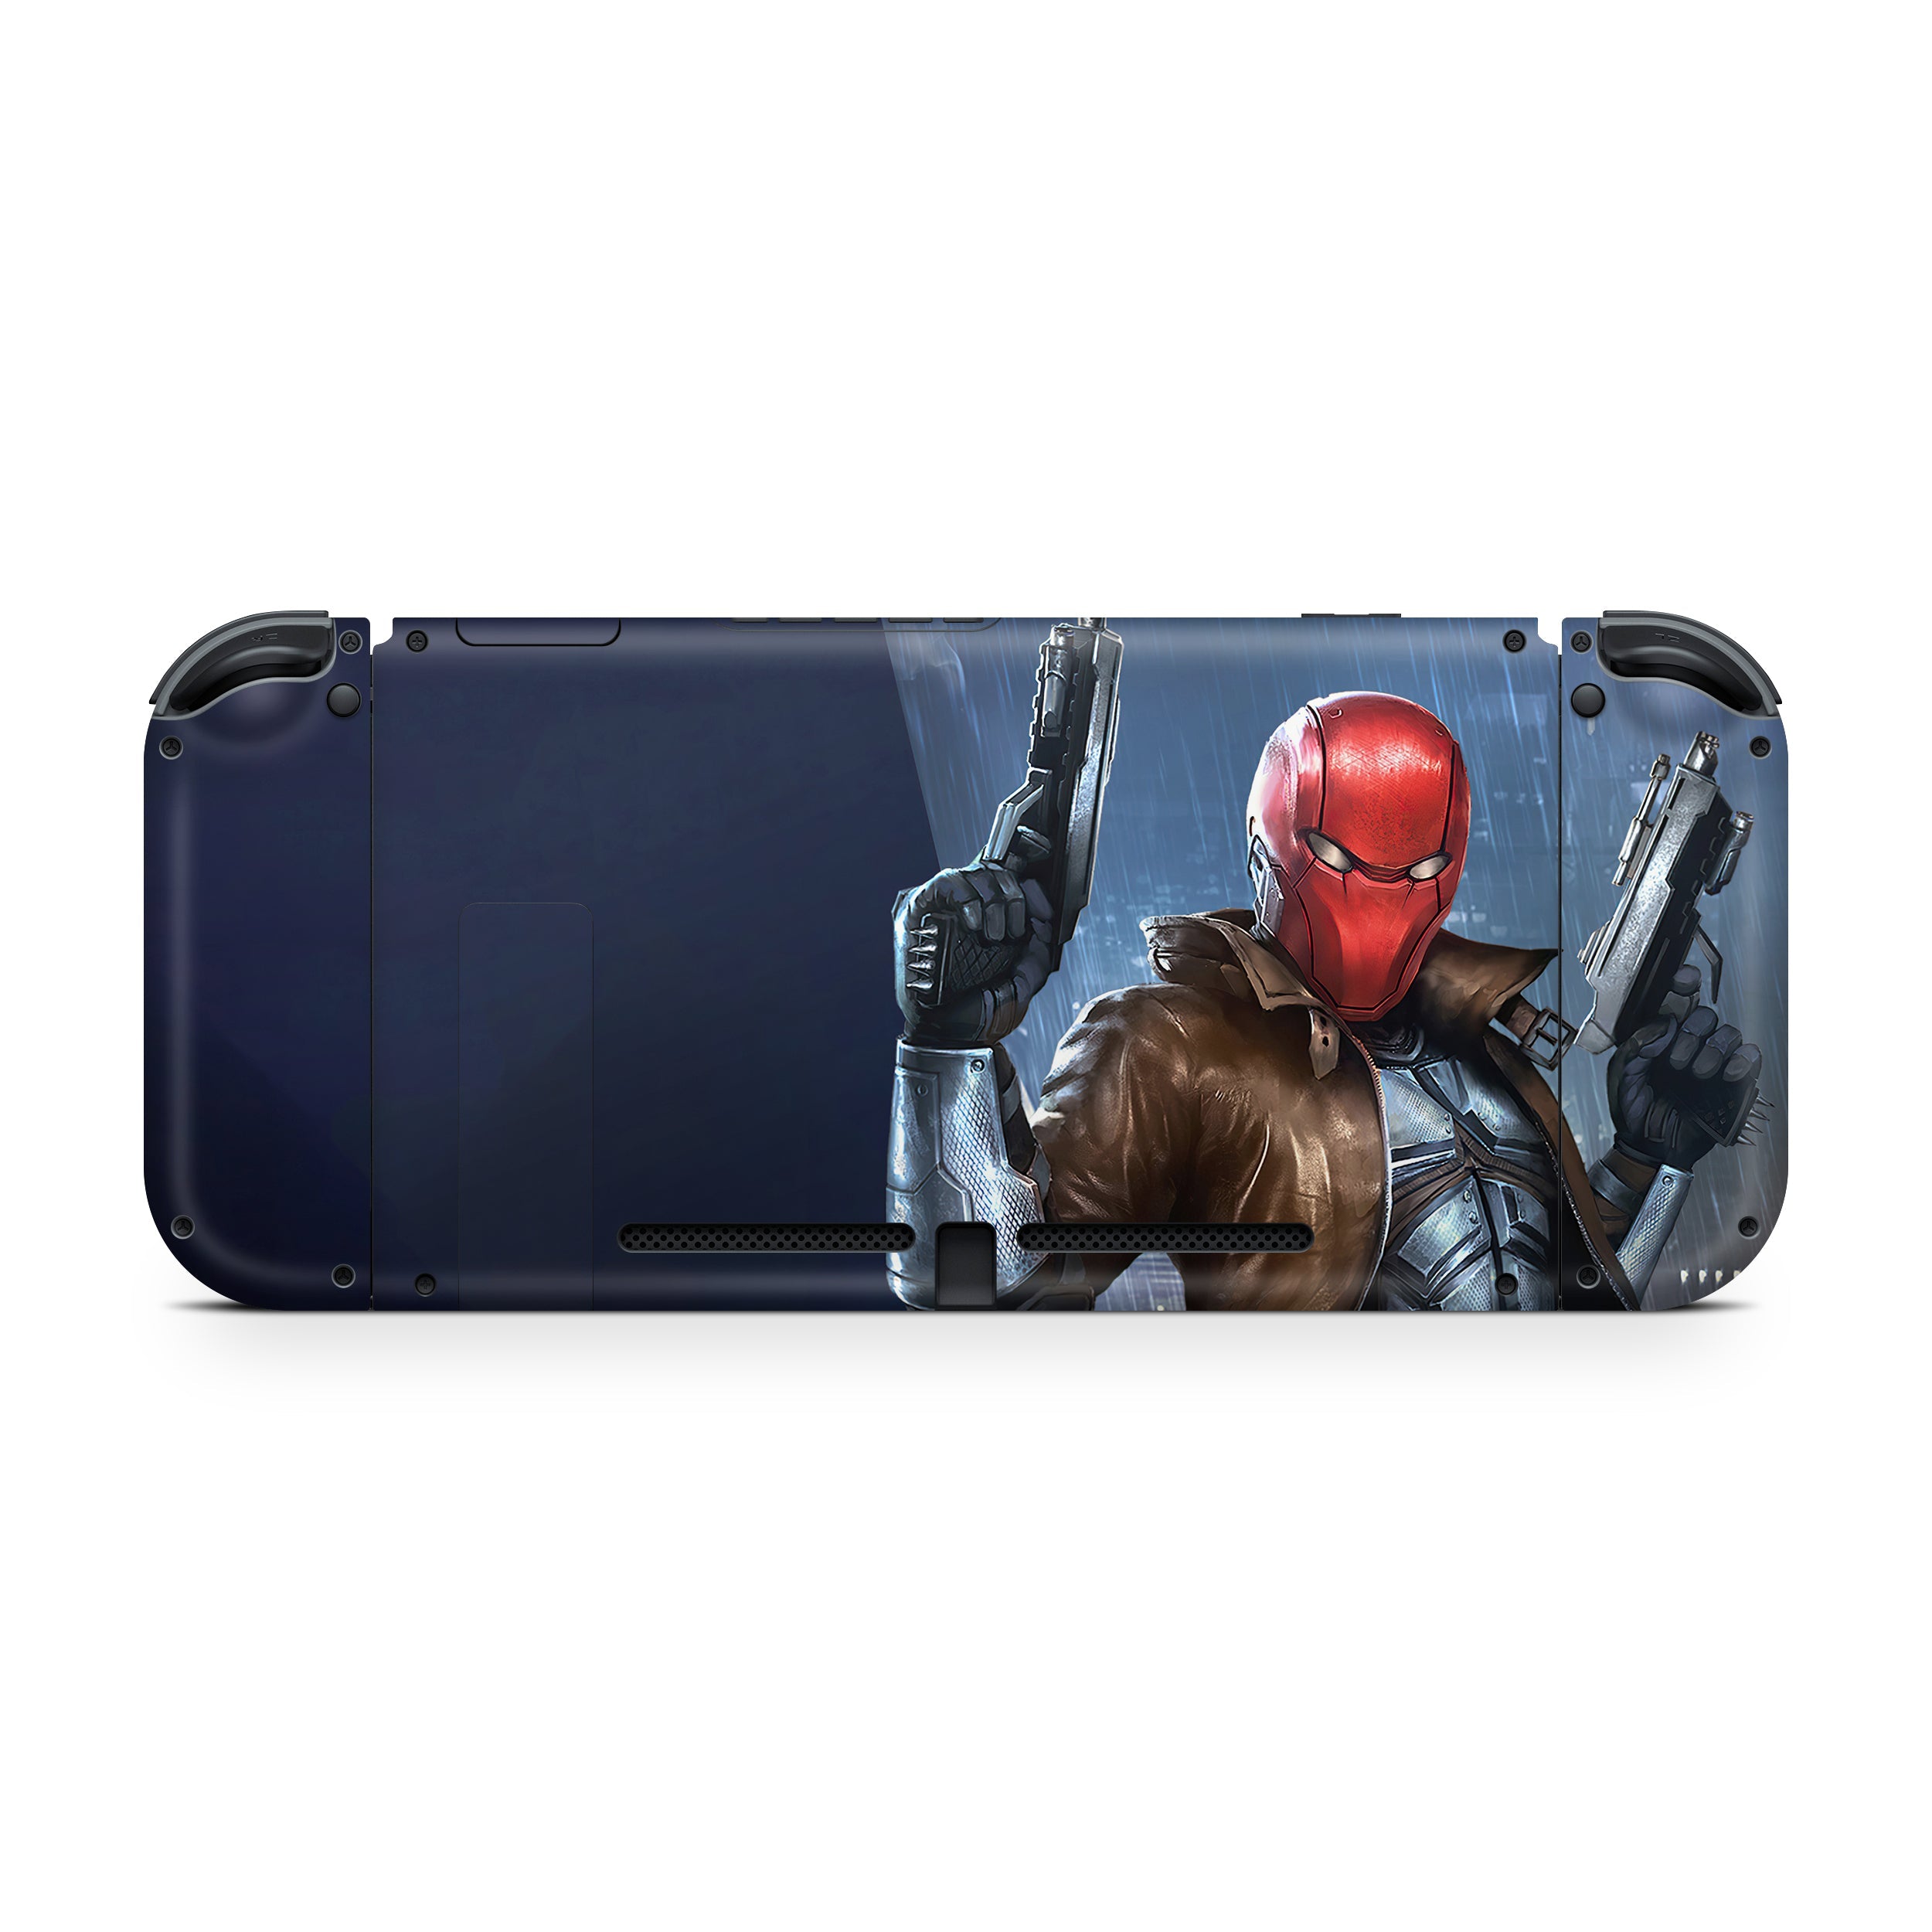 A video game skin featuring a DC Comics Red Hood design for the Nintendo Switch.